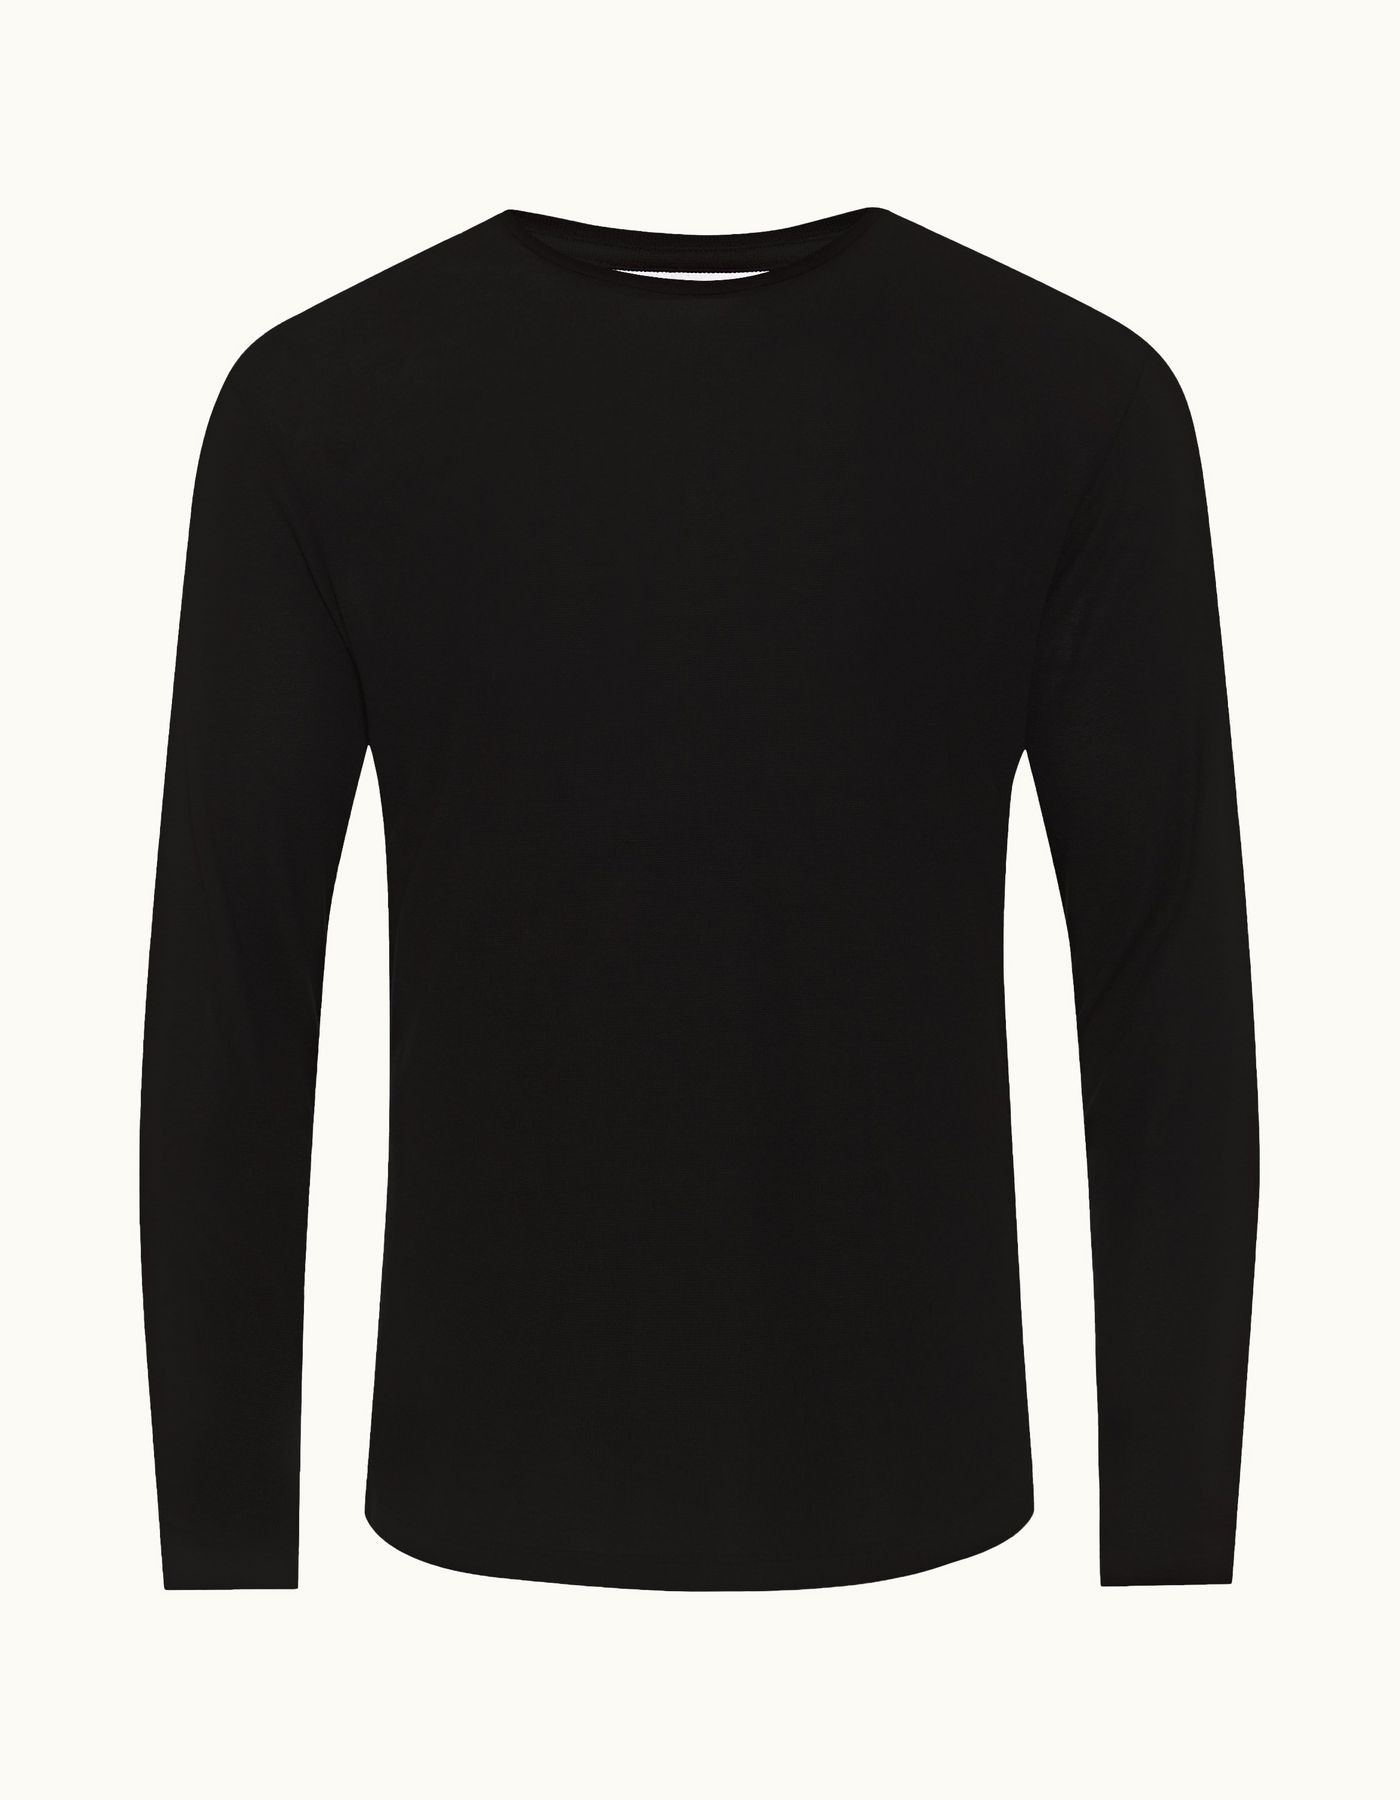 Ob-T Ice Wool - Mens Black Tailored Fit Crewneck Long-Sleeve Ice Wool T-shirt